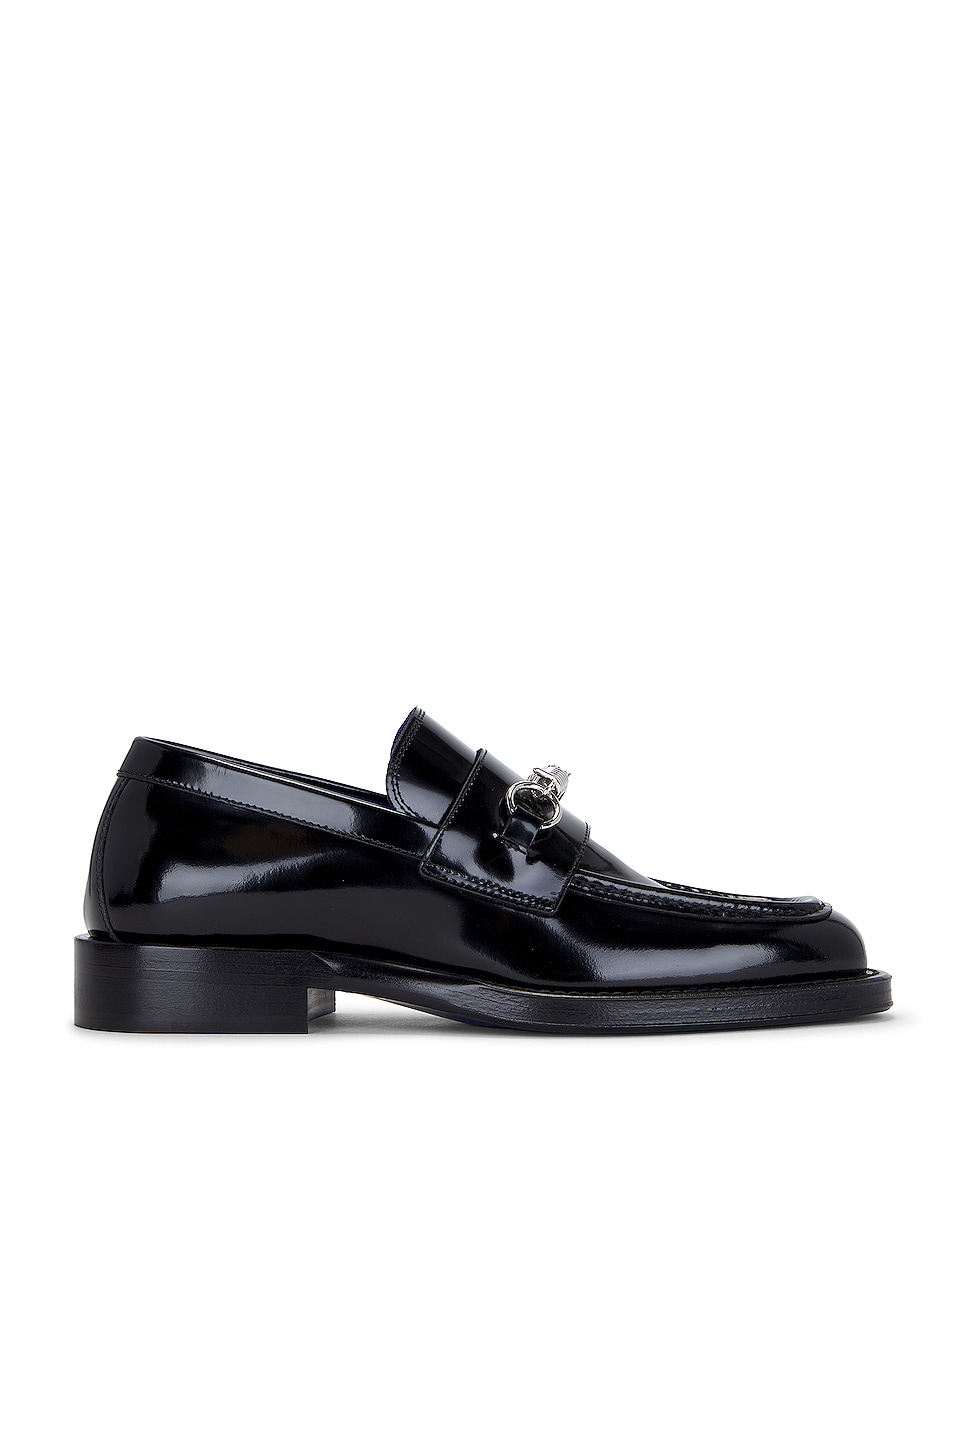 Image 1 of Burberry Loafer in Black